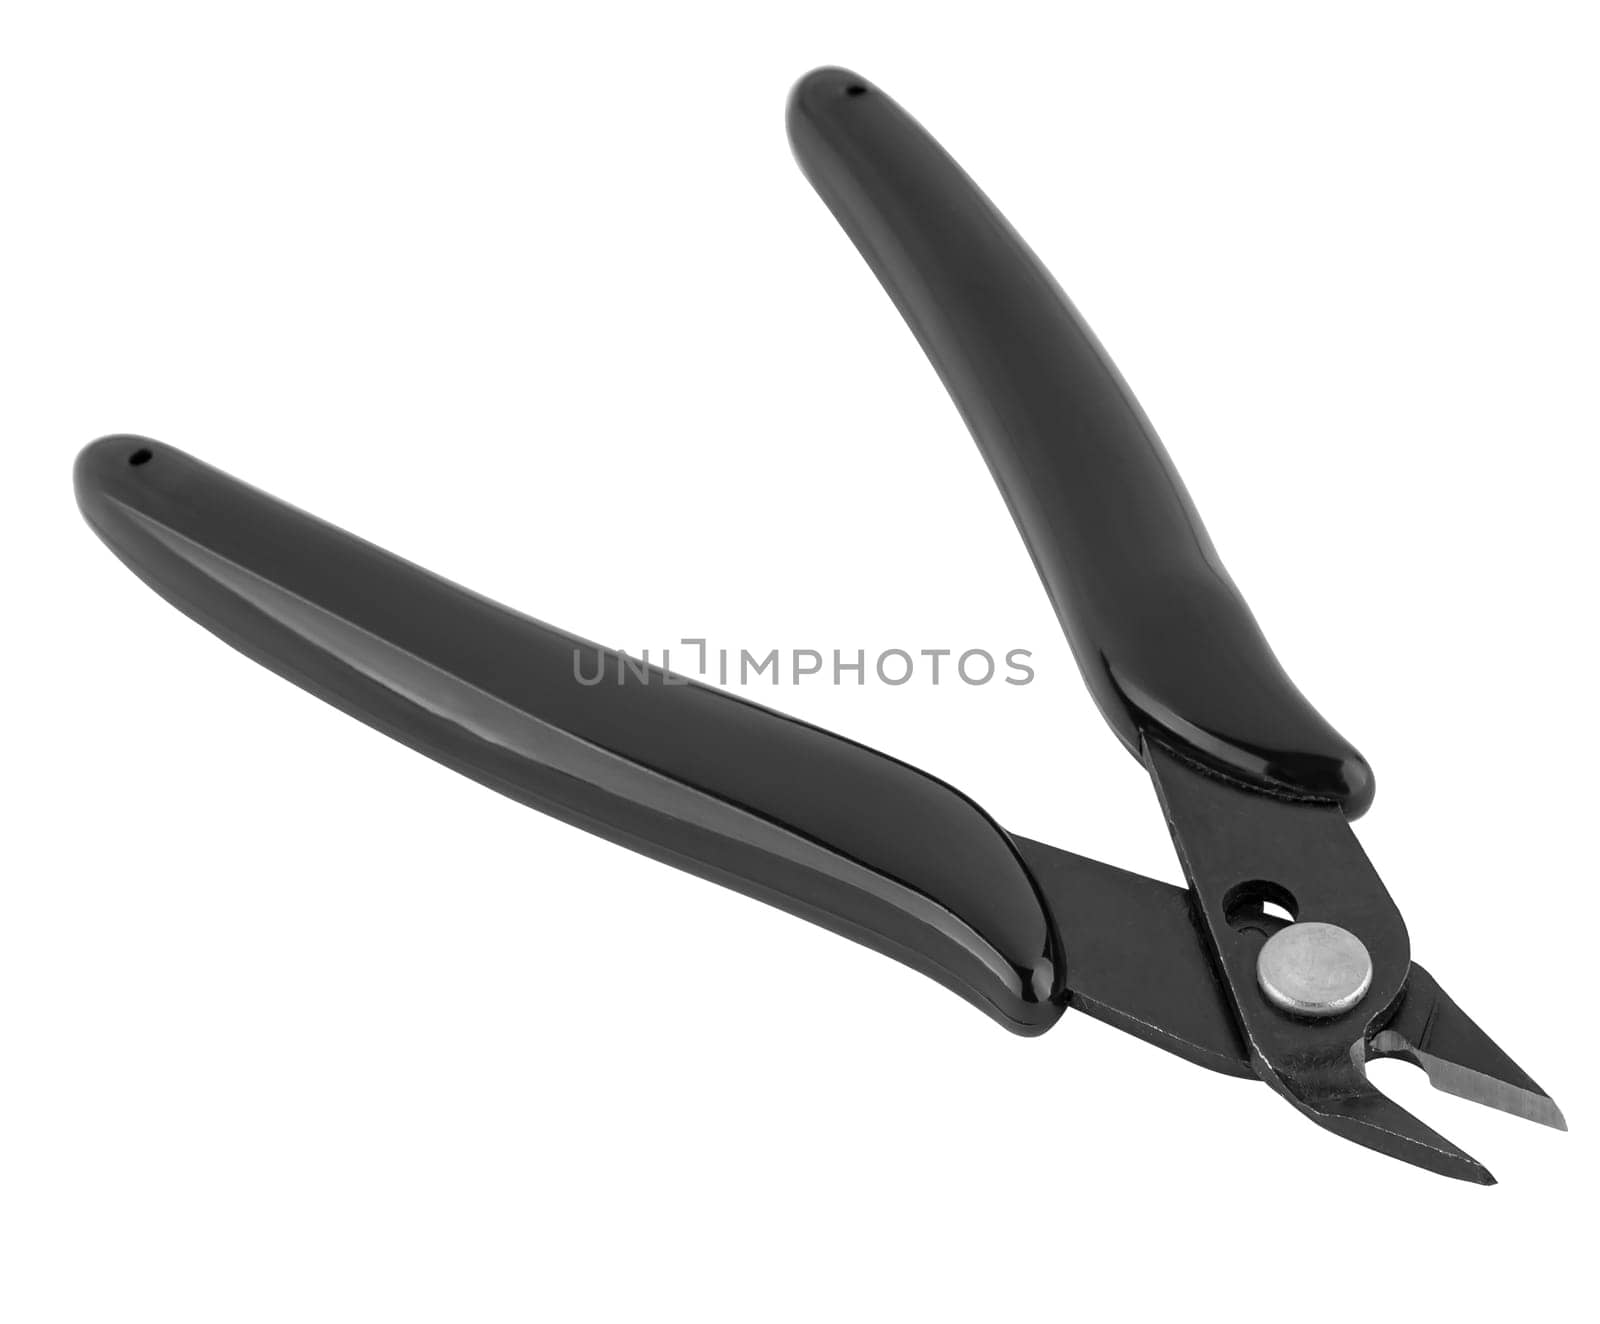 Wire cutting wire cutters on white background